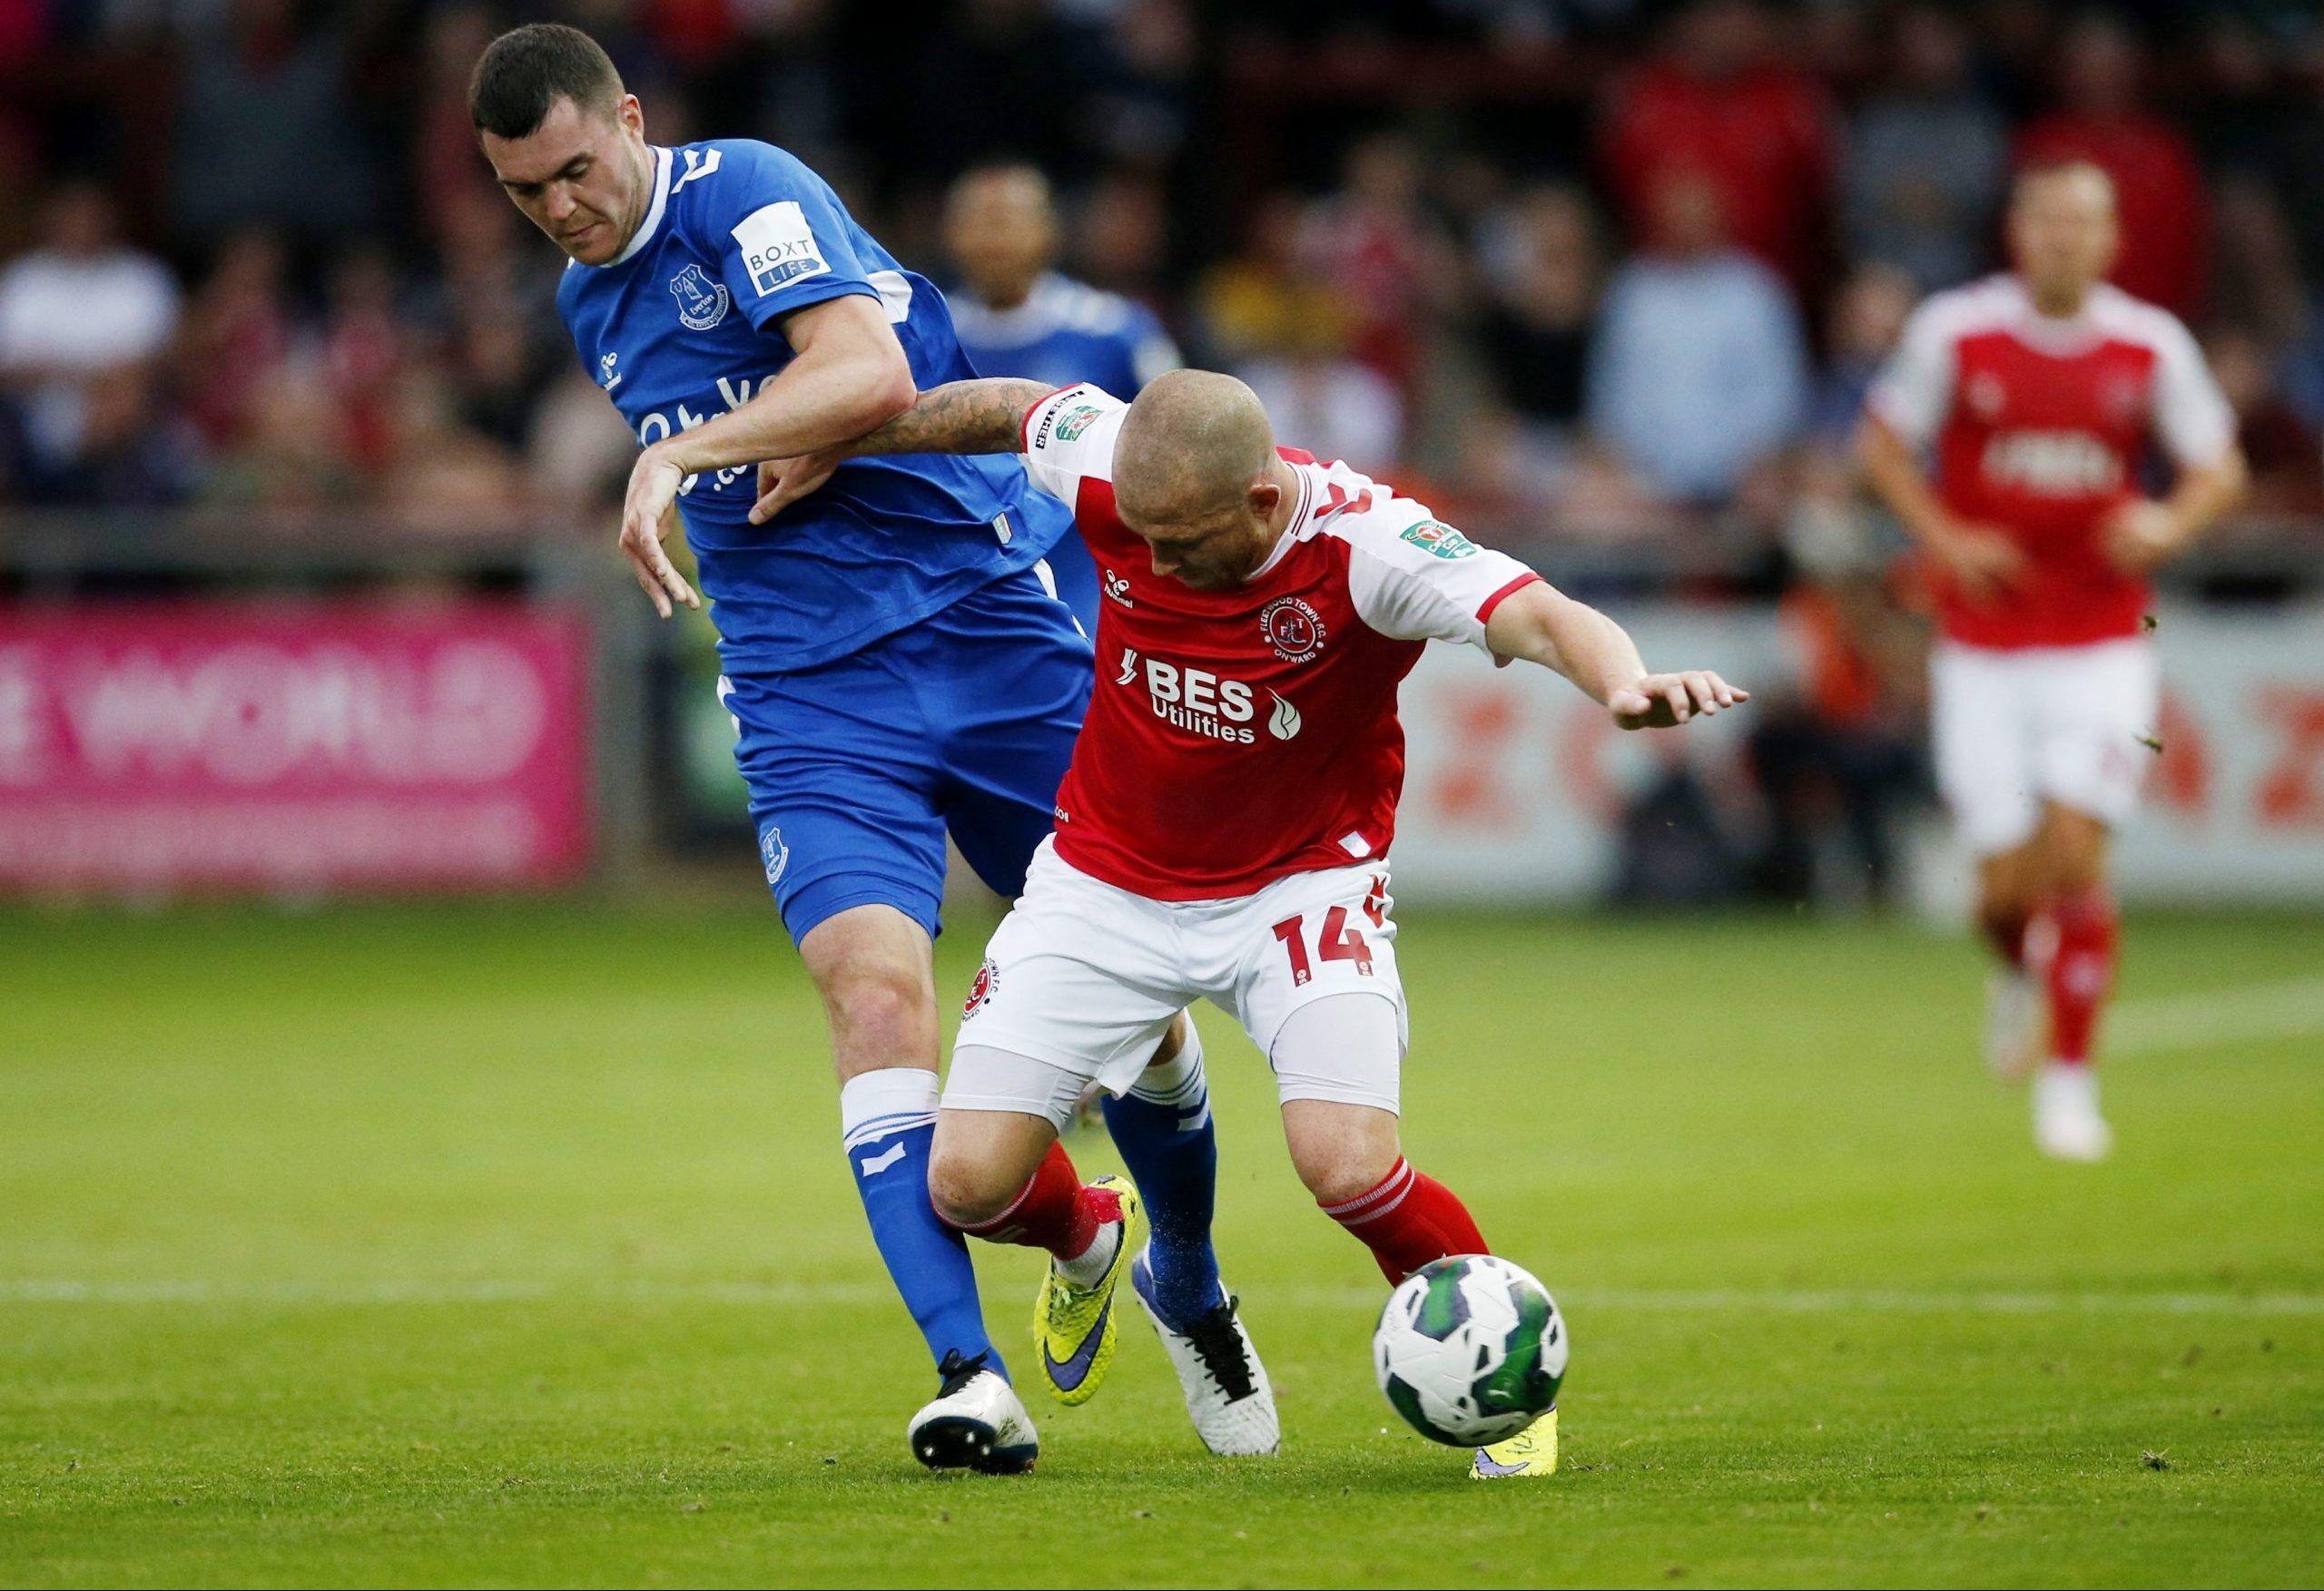 Soccer Football - Carabao Cup Second Round - Fleetwood Town v Everton - Highbury Stadium, Fleetwood, Britain - August 23, 2022 Everton's Michael Keane in action with Fleetwood Town's Joe Garner Action Images via Reuters/Ed Sykes EDITORIAL USE ONLY. No use with unauthorized audio, video, data, fixture lists, club/league logos or 'live' services. Online in-match use limited to 75 images, no video emulation. No use in betting, games or single club /league/player publications.  Please contact your a